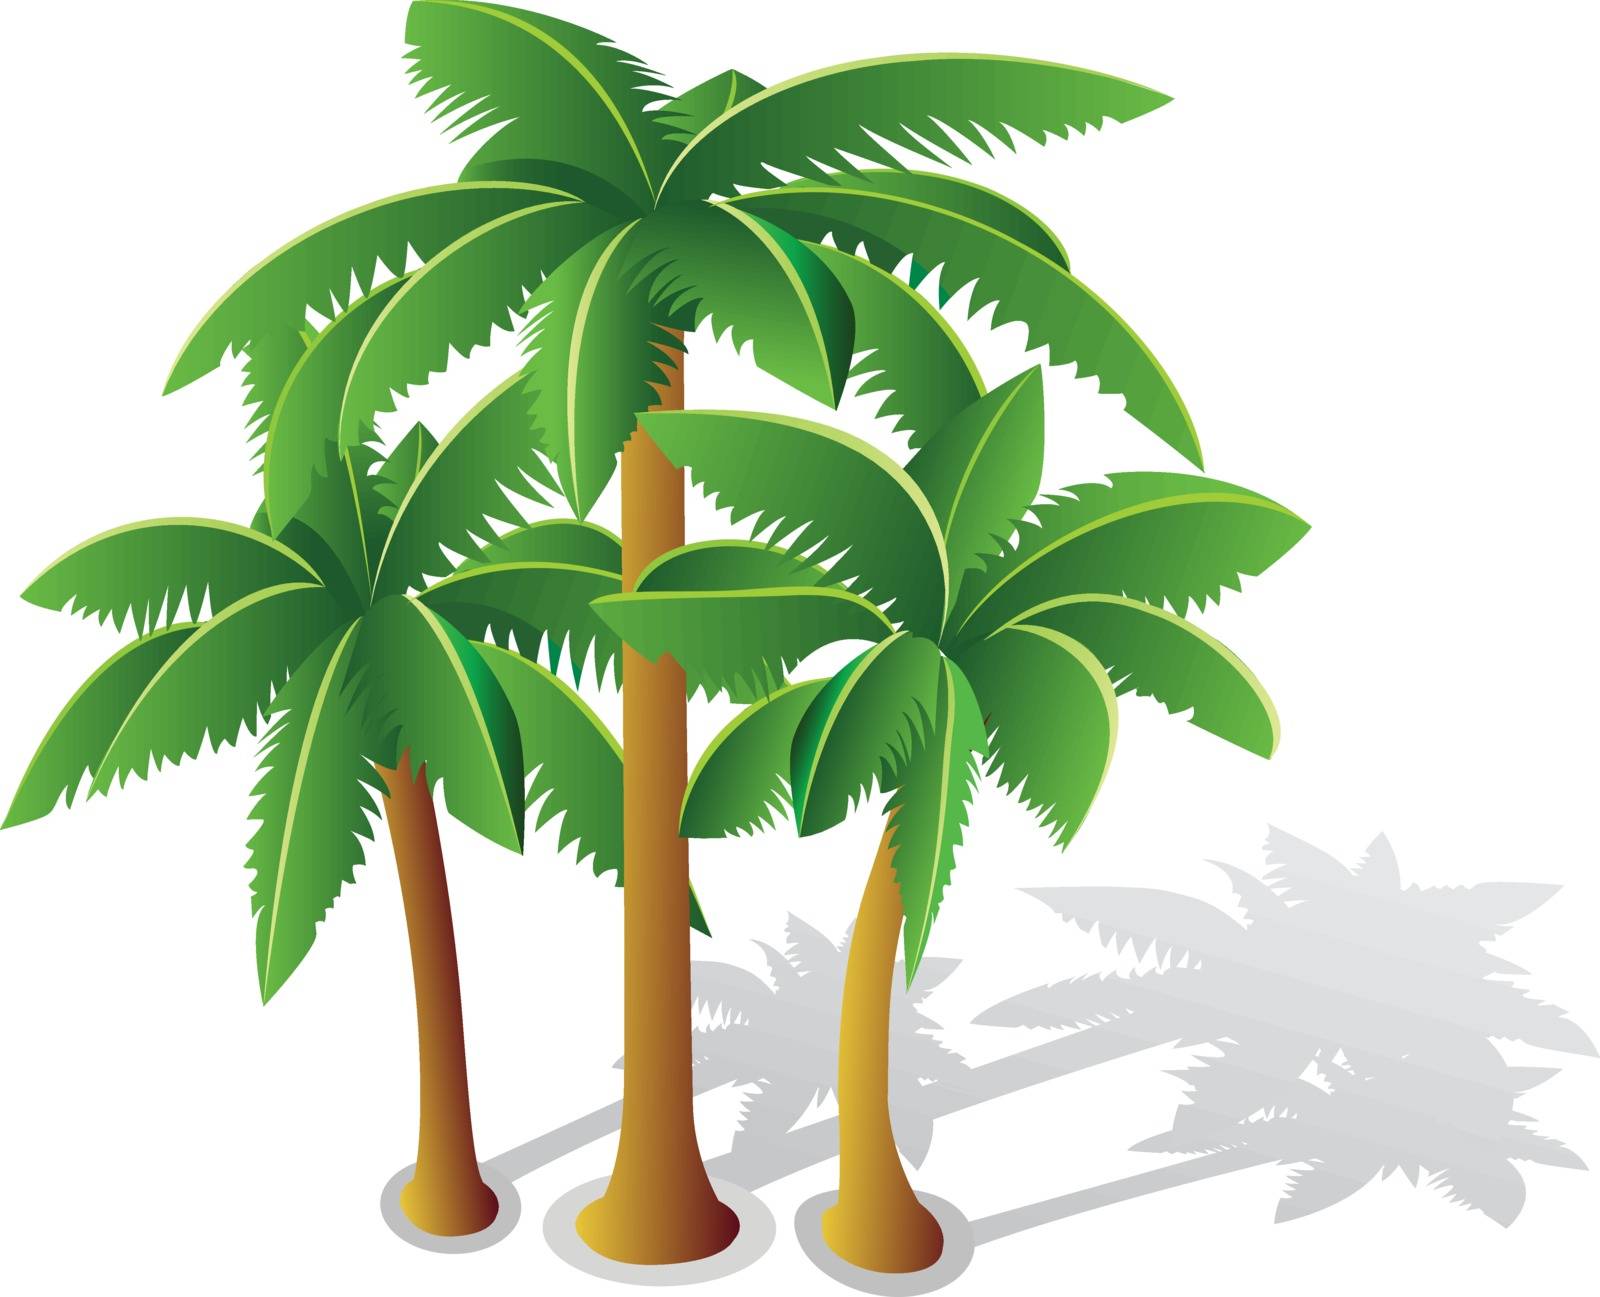 Tropical palms for web design and creative inspiration on white